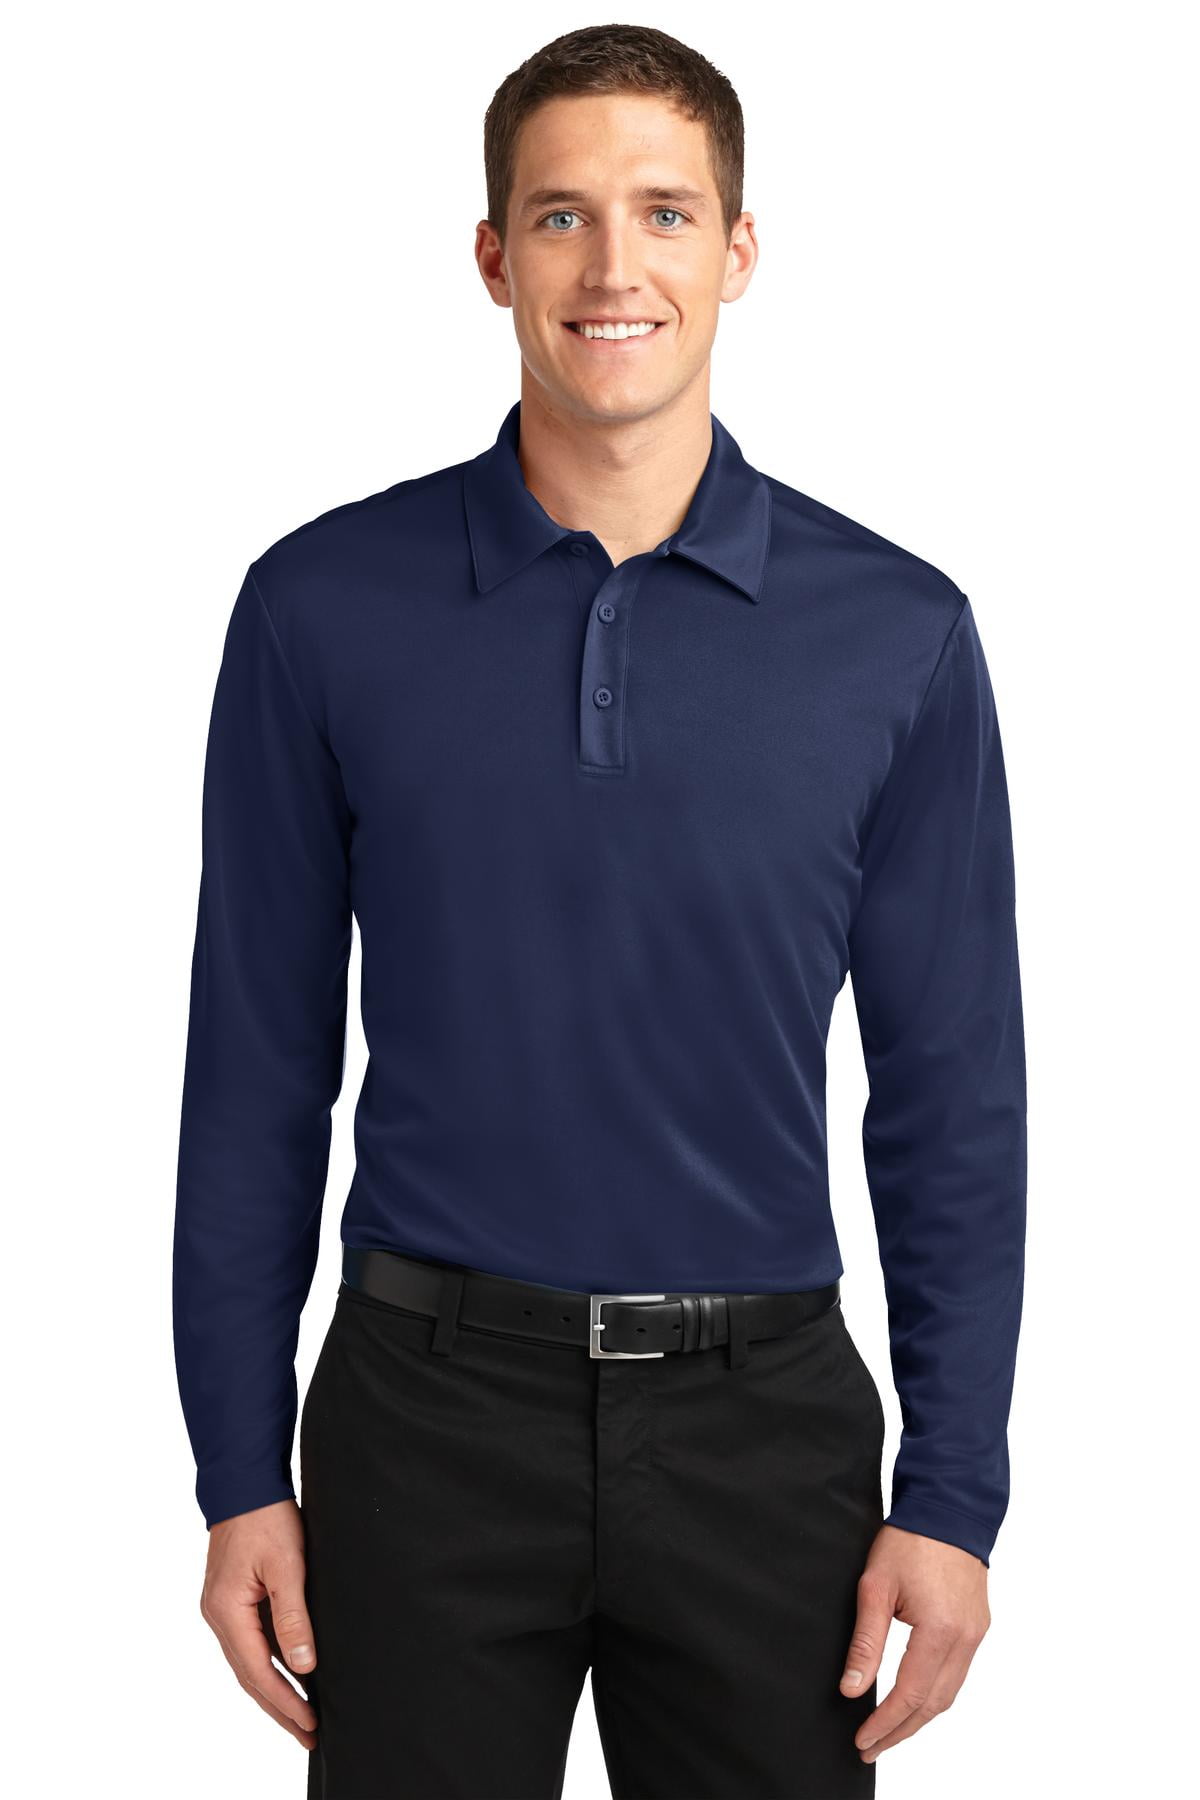 Port Authority Silk Touch Performance Long Sleeve Polo K540ls - Navy ...